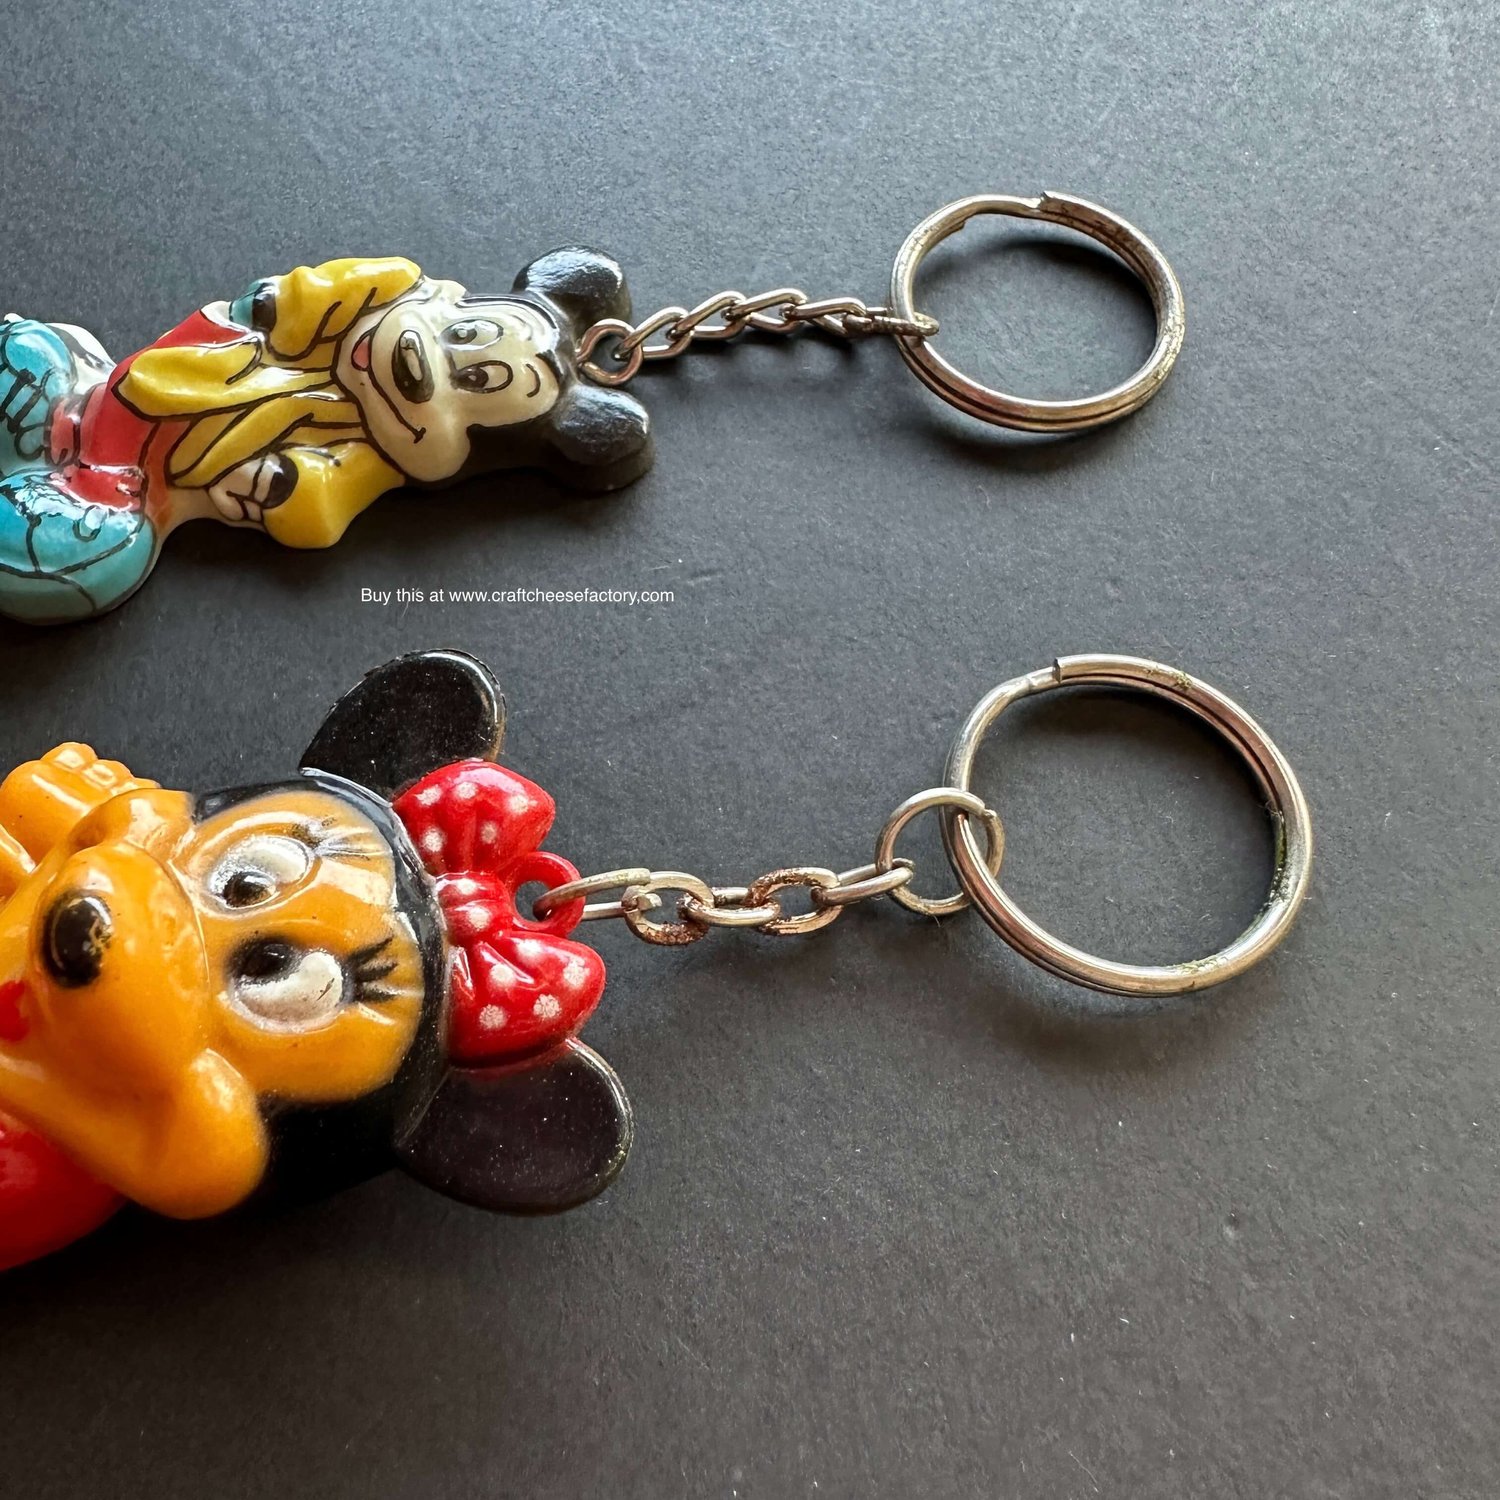 Mickey Minnie Mouse Keychains, Keychains Minni Mouse